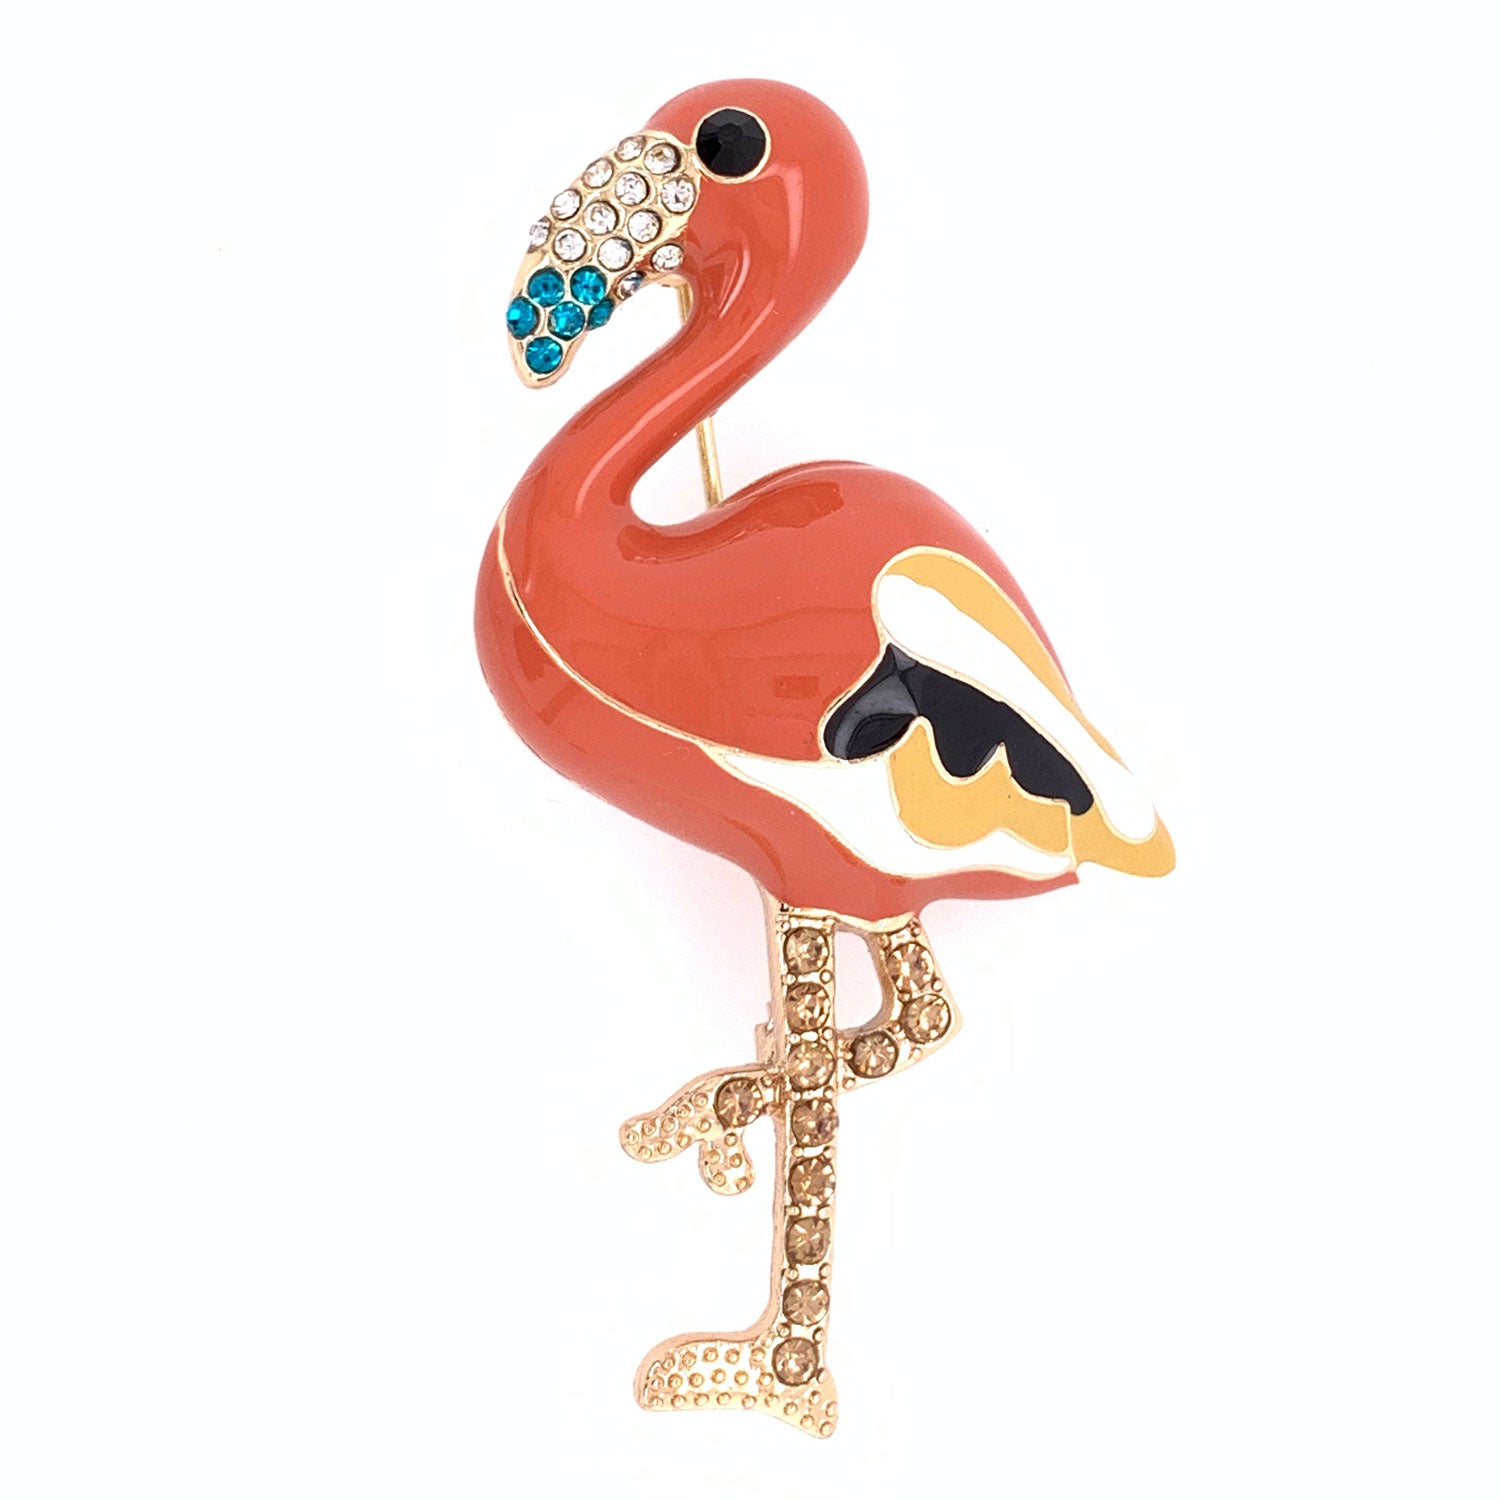 SKZKK Colourful Flamingo Brooches Diamond Broaches for Women Crystal Rhinestone Animal Pins Colorful Diamond Party Vintage Womens Jewelry